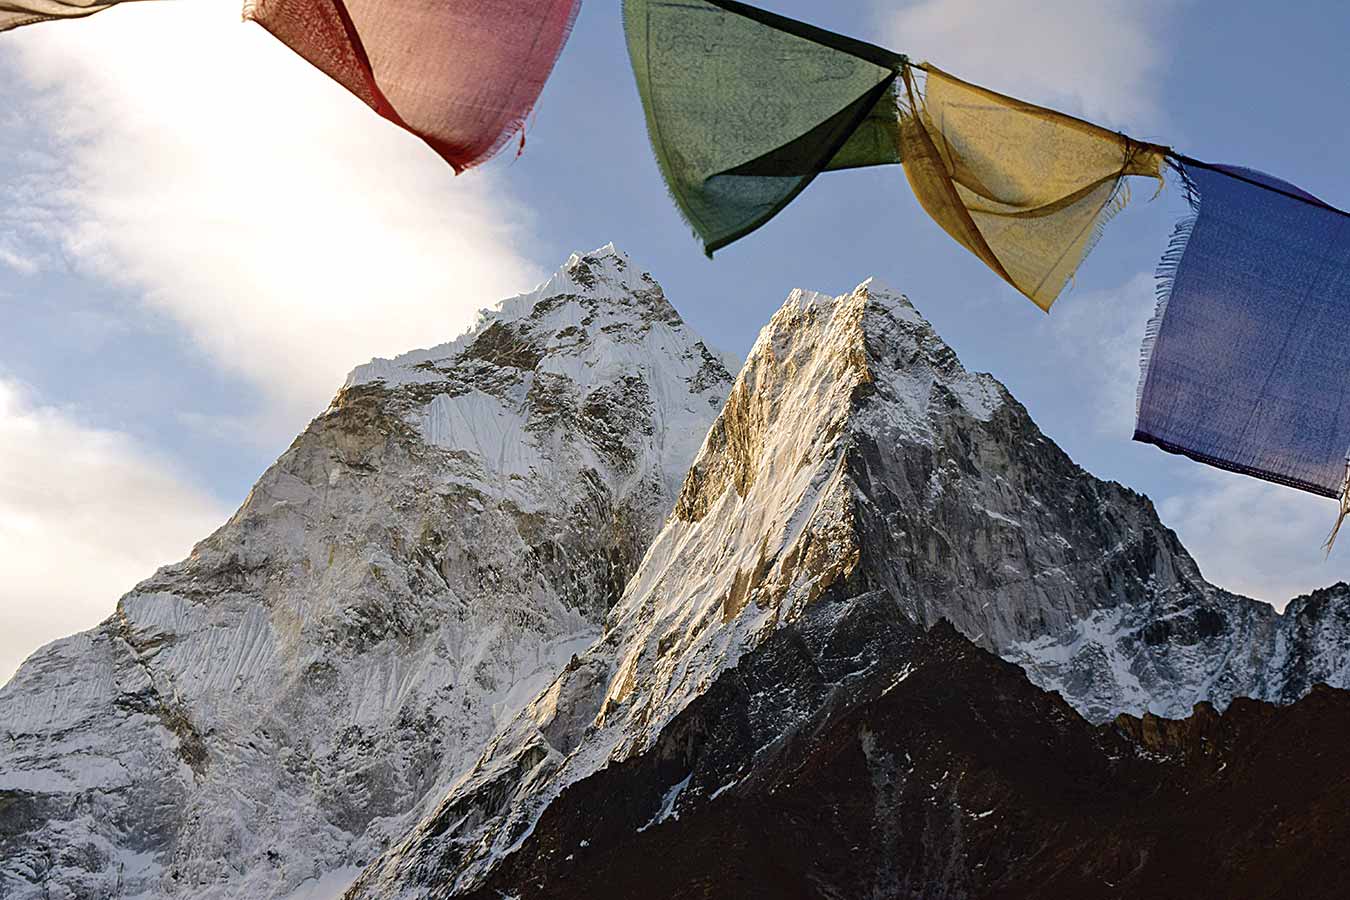 Adapting the Khumbu: Scientists grapple with climate impacts in Everest region